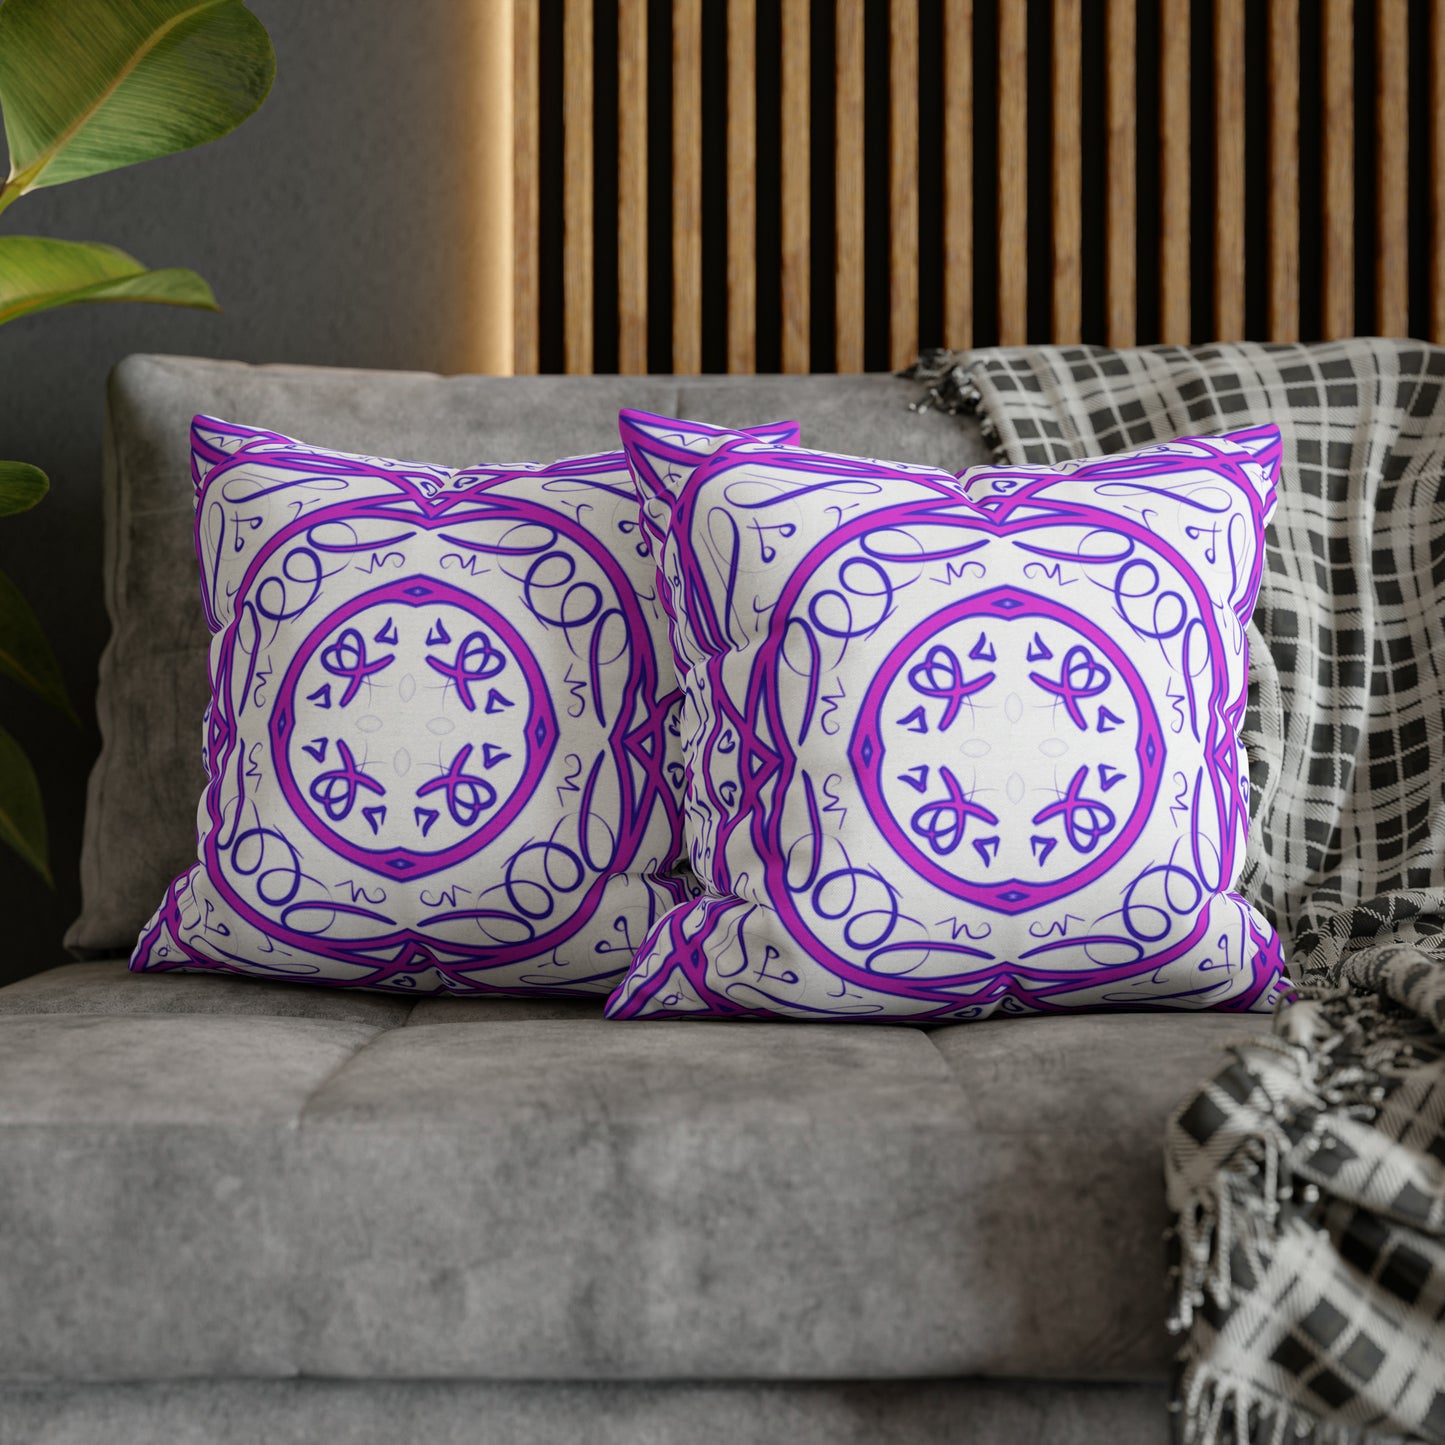 Spiritual Connection Language Square Pillowcase - Energetic Home Decor - Cosmic Statement Piece - High Vibe Home